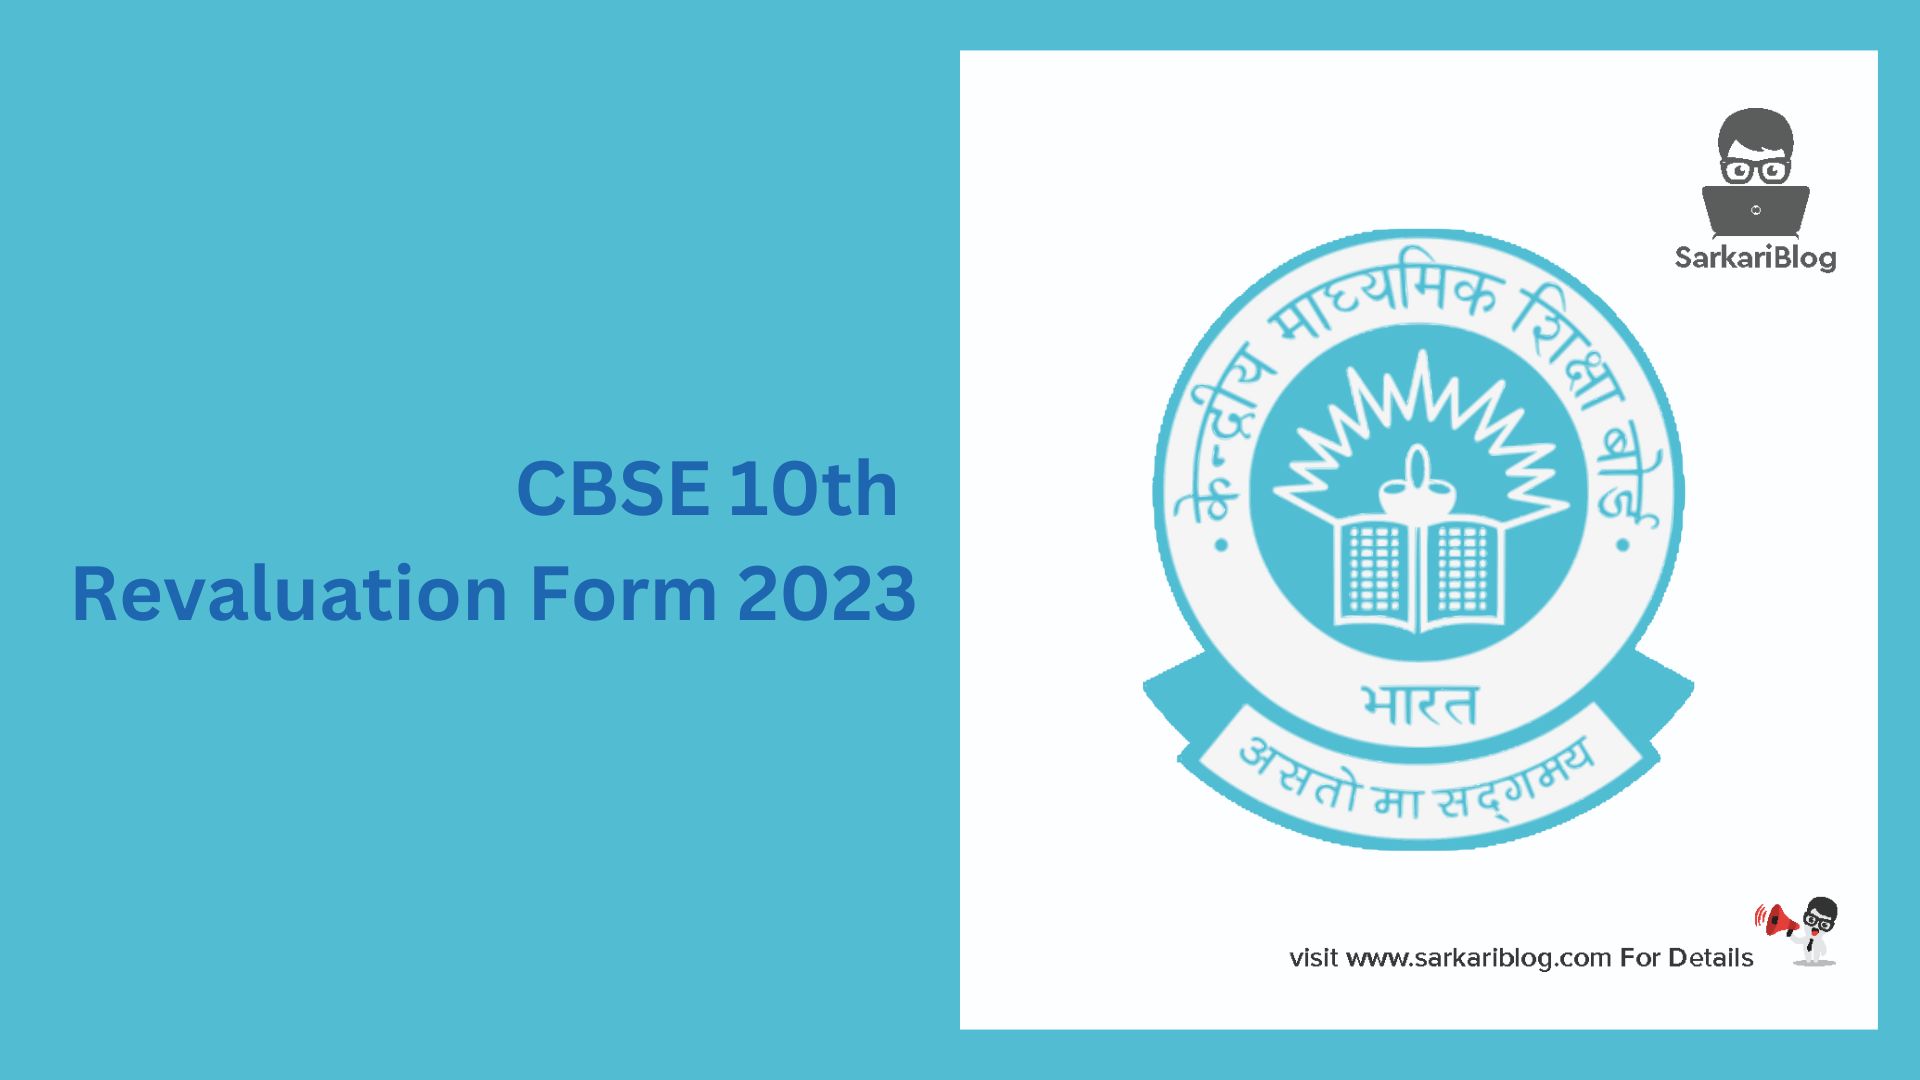 CBSE 10th Revaluation Form 2023